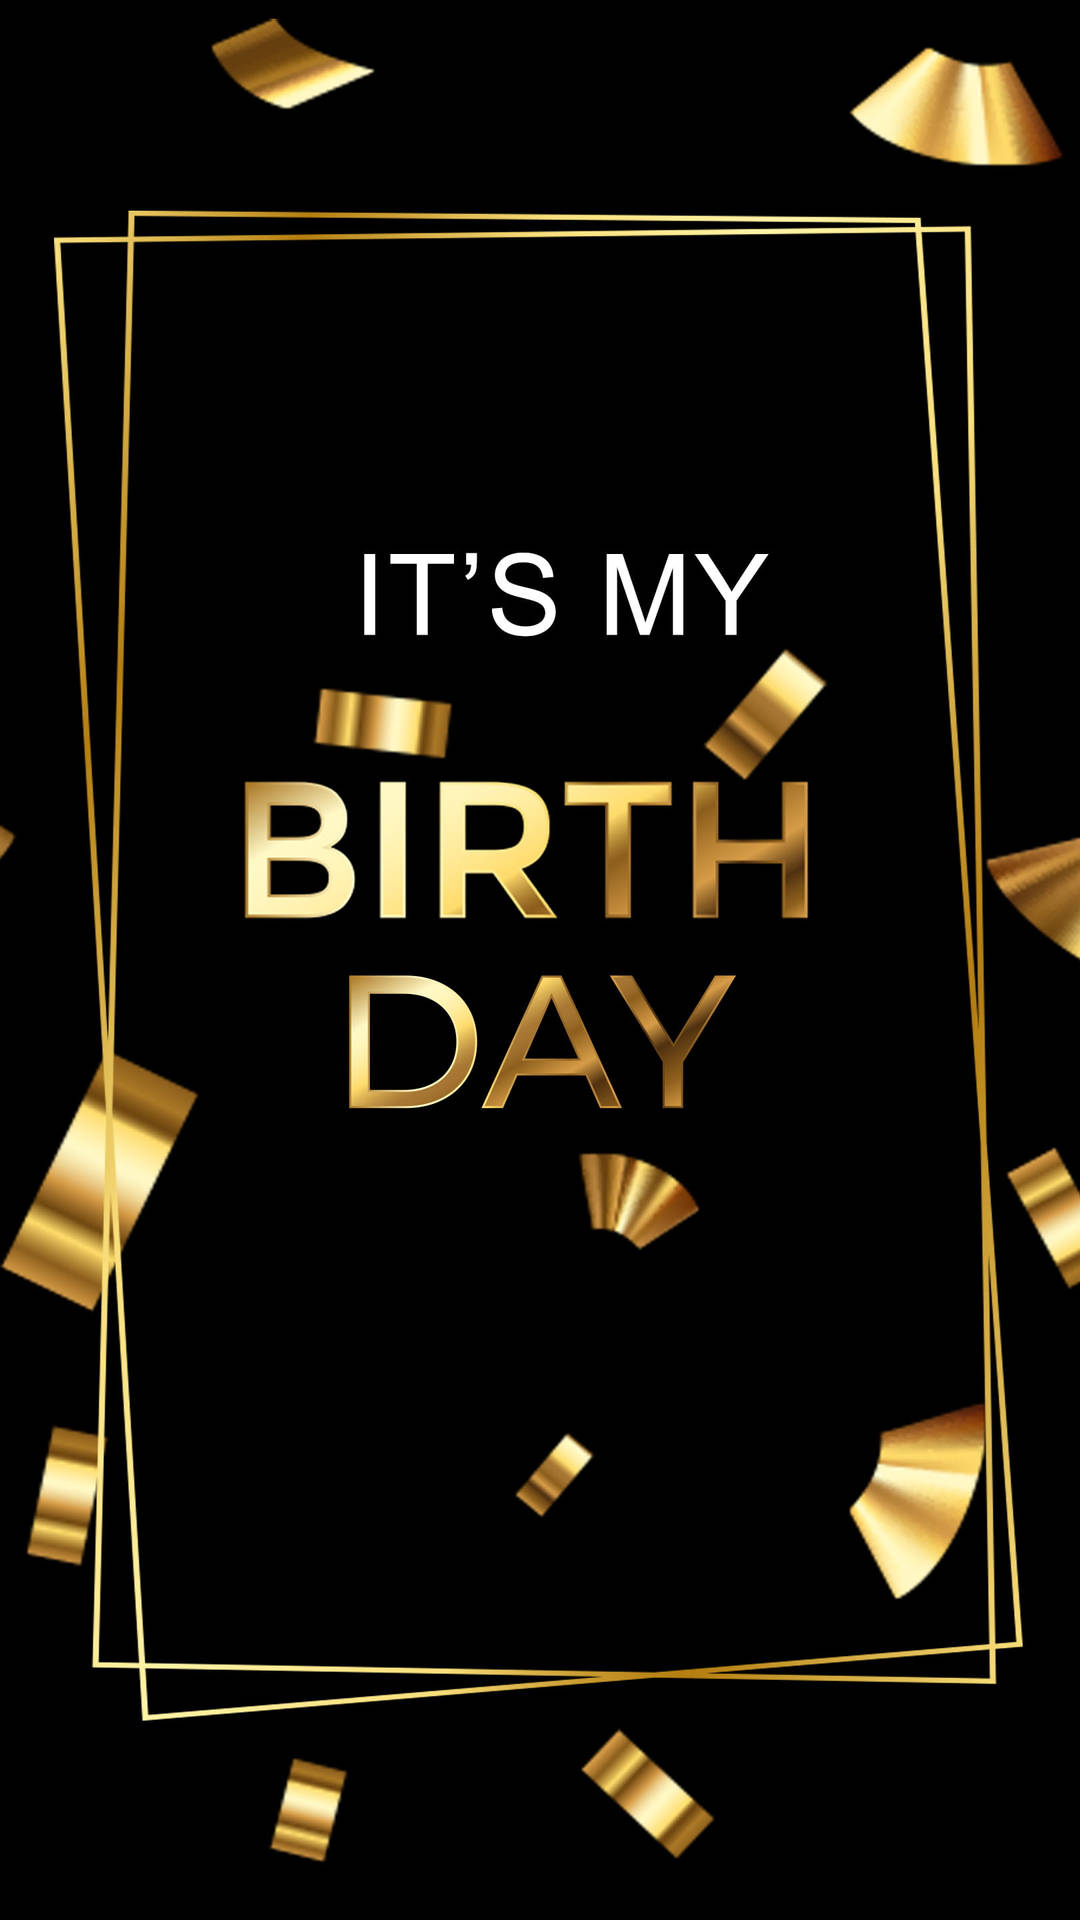 It’s My Birthday Greeting In Black And Gold Wallpaper